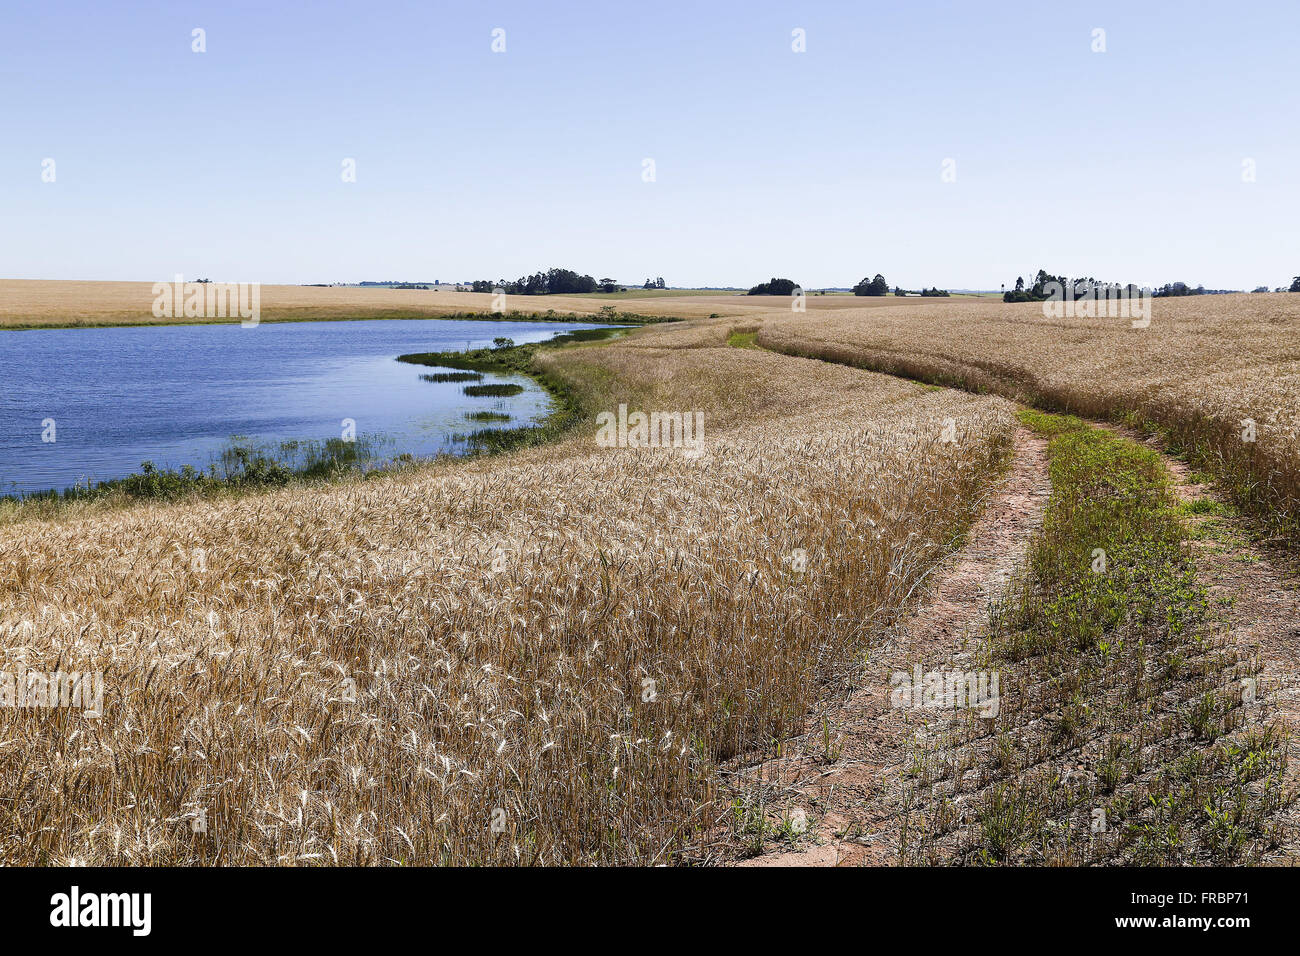 Acude used for irrigation of wheat crops within the municipality Stock Photo